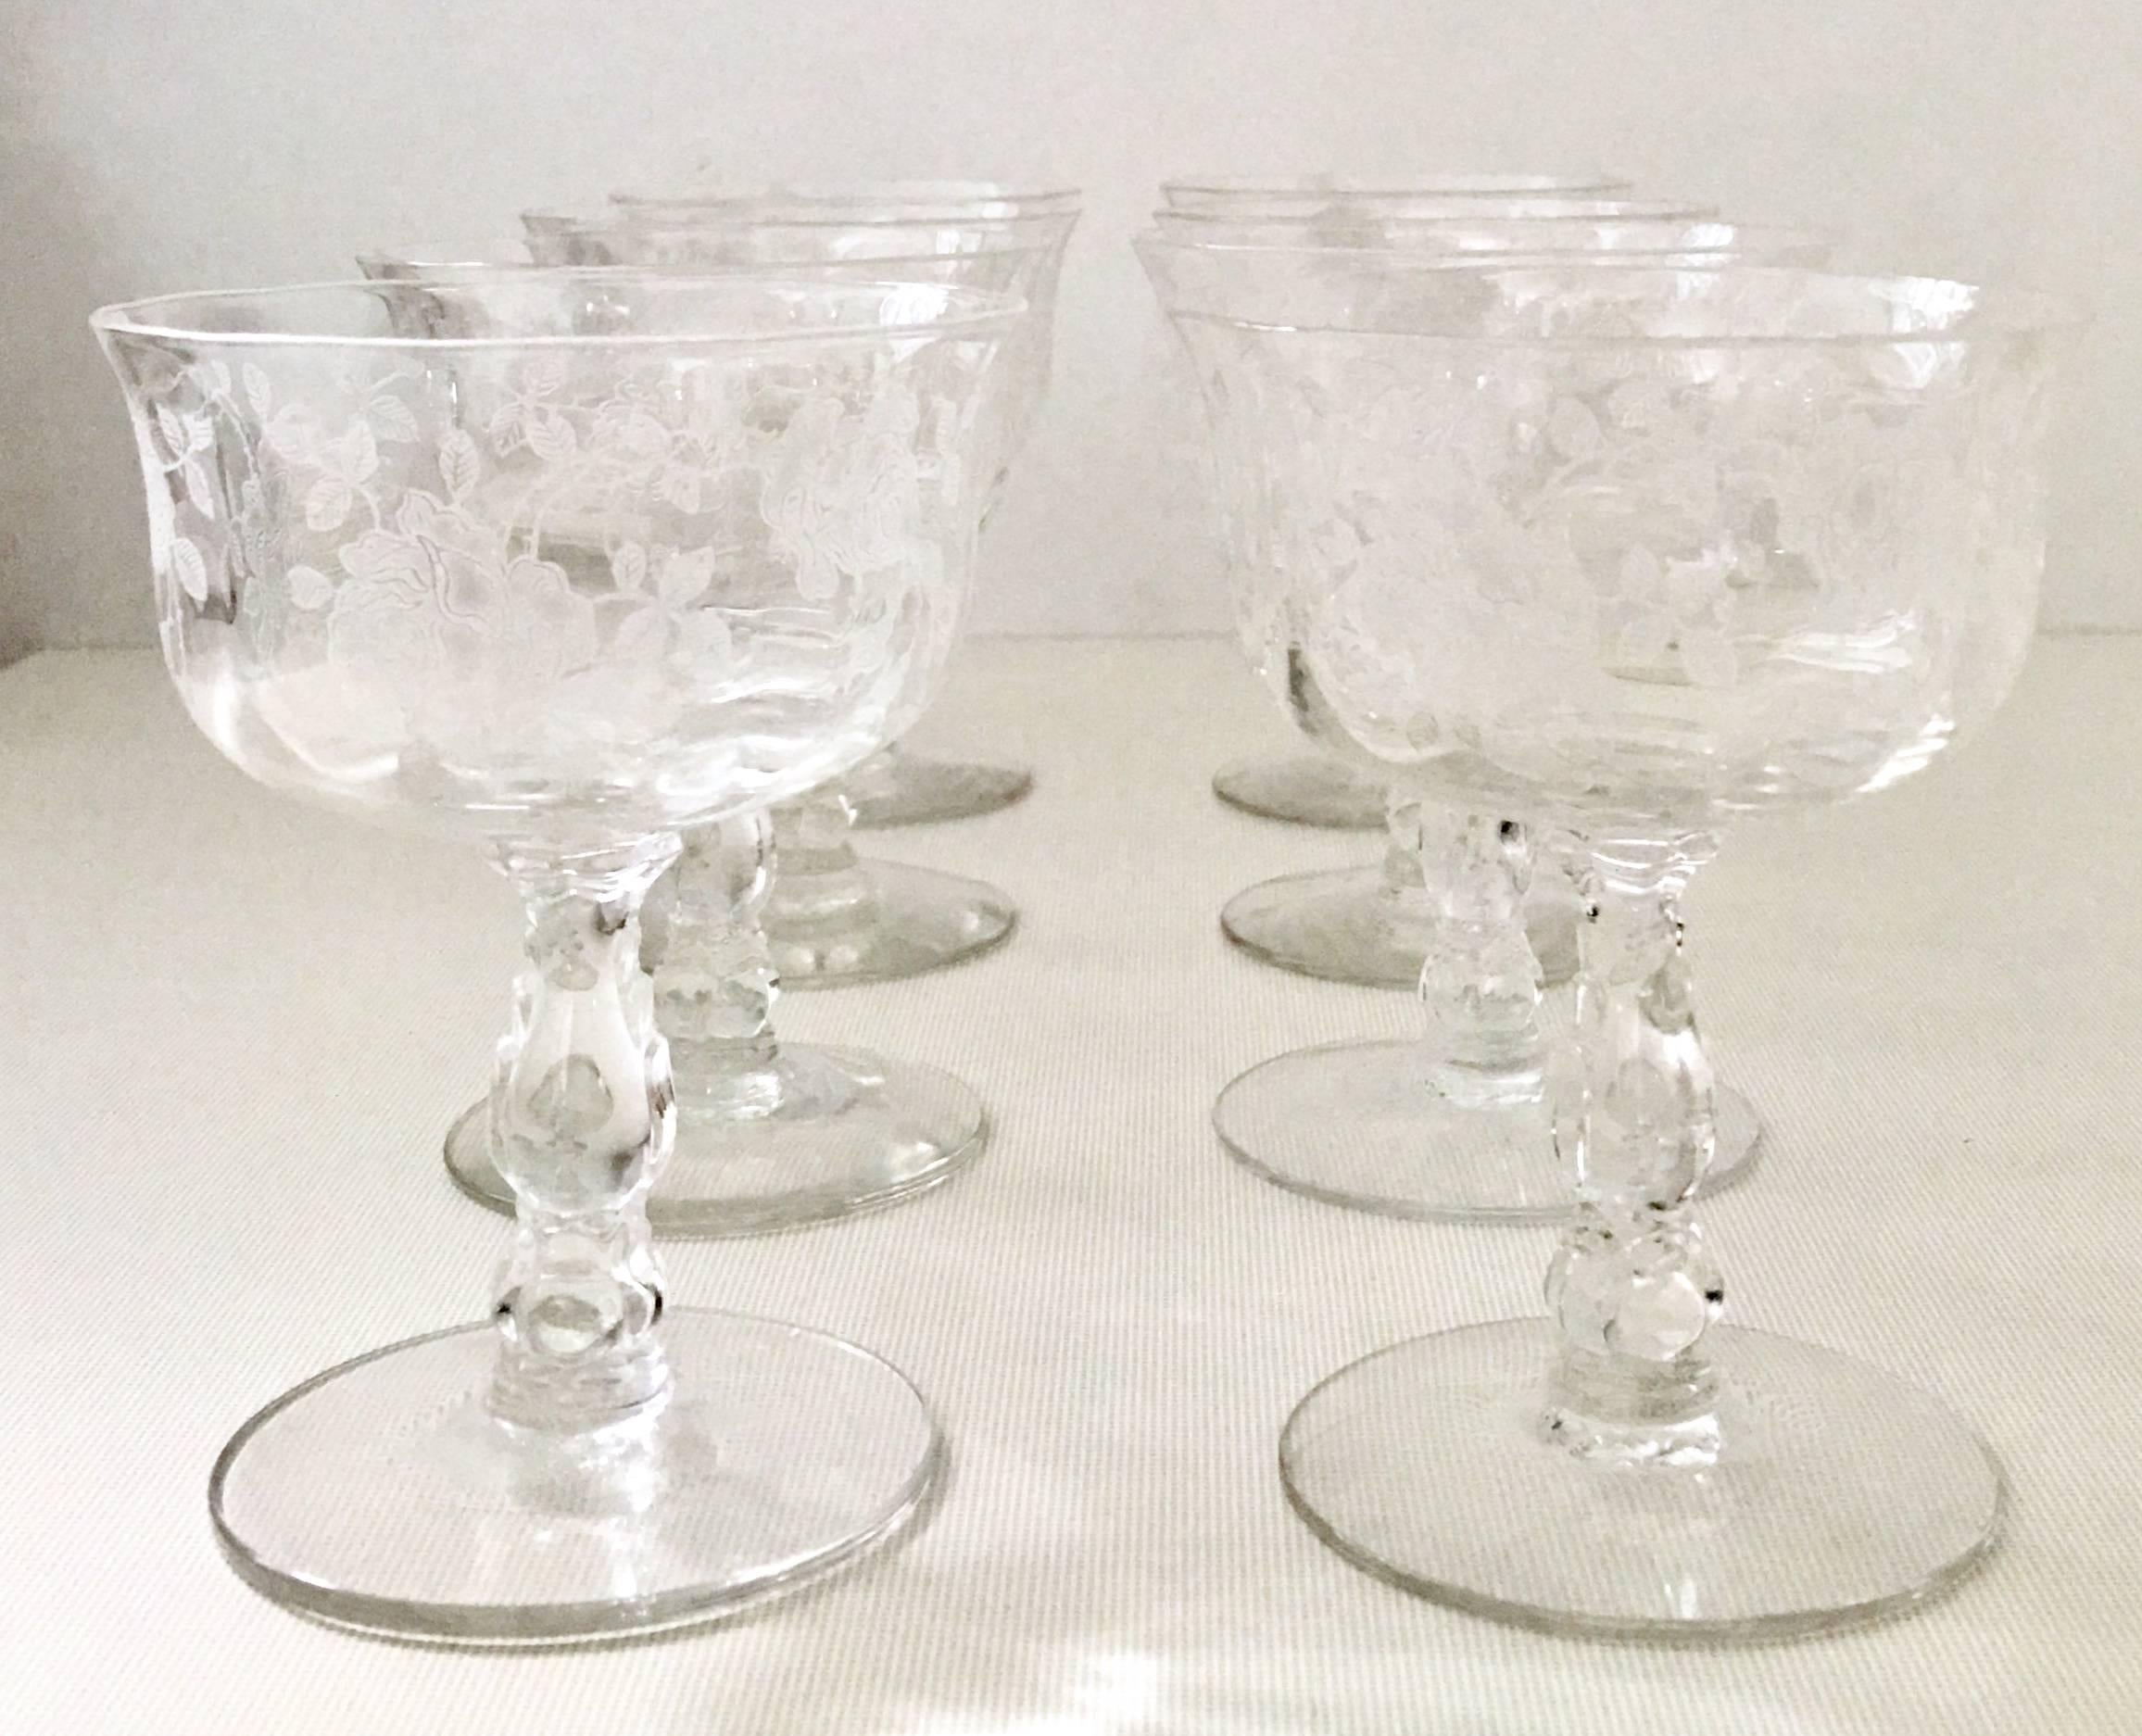 Midcentury American etched cut crystal coupe stem glasses, set of eight. Features a optic shape with a rose and vine pattern.